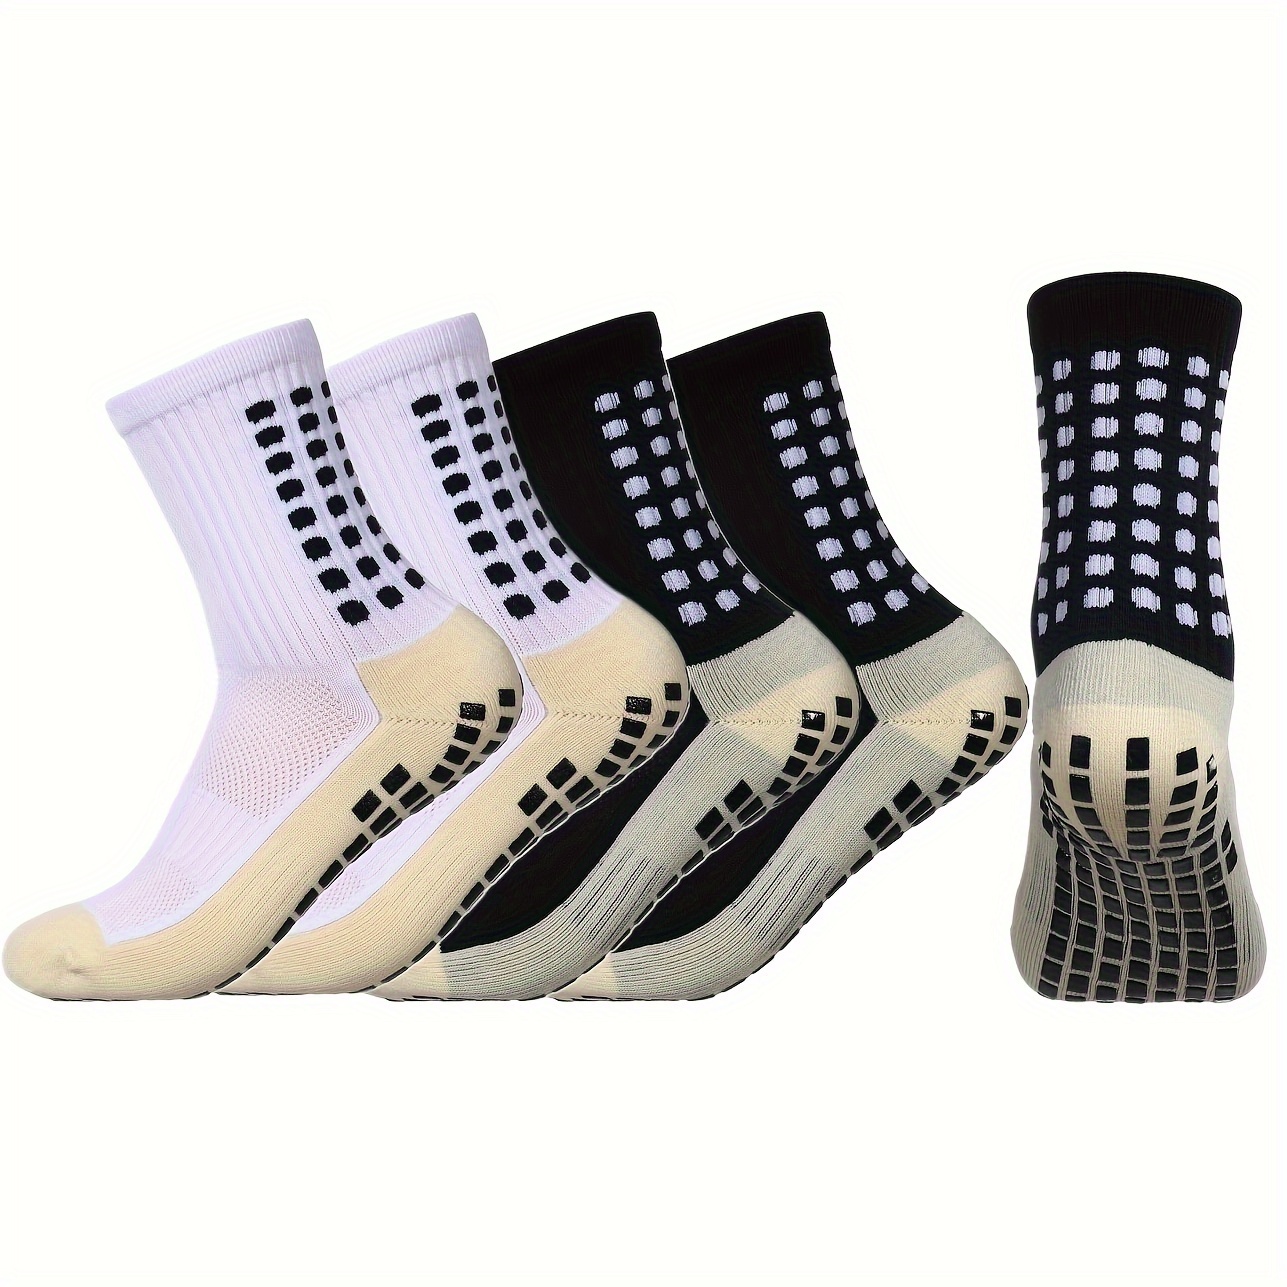 

5 Pairs Of Men's Professional Football Socks With Non Slip Grains, Comfy Breathable Sweat Absorbing Soft & Elastic Socks, Spring & Summer